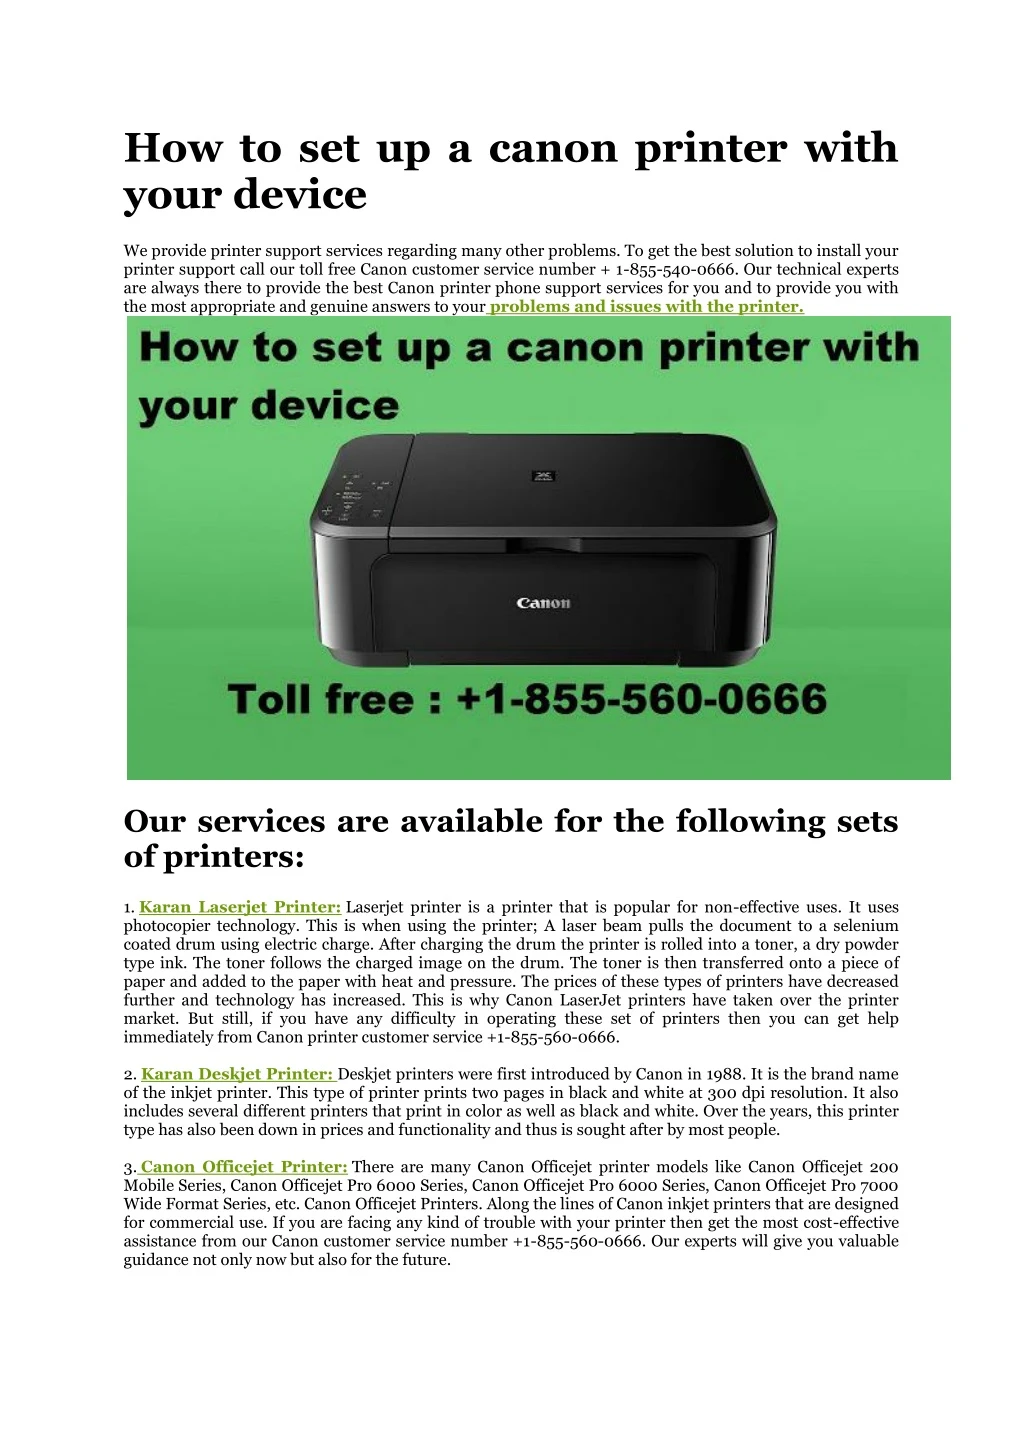 how to set up a canon printer with your device